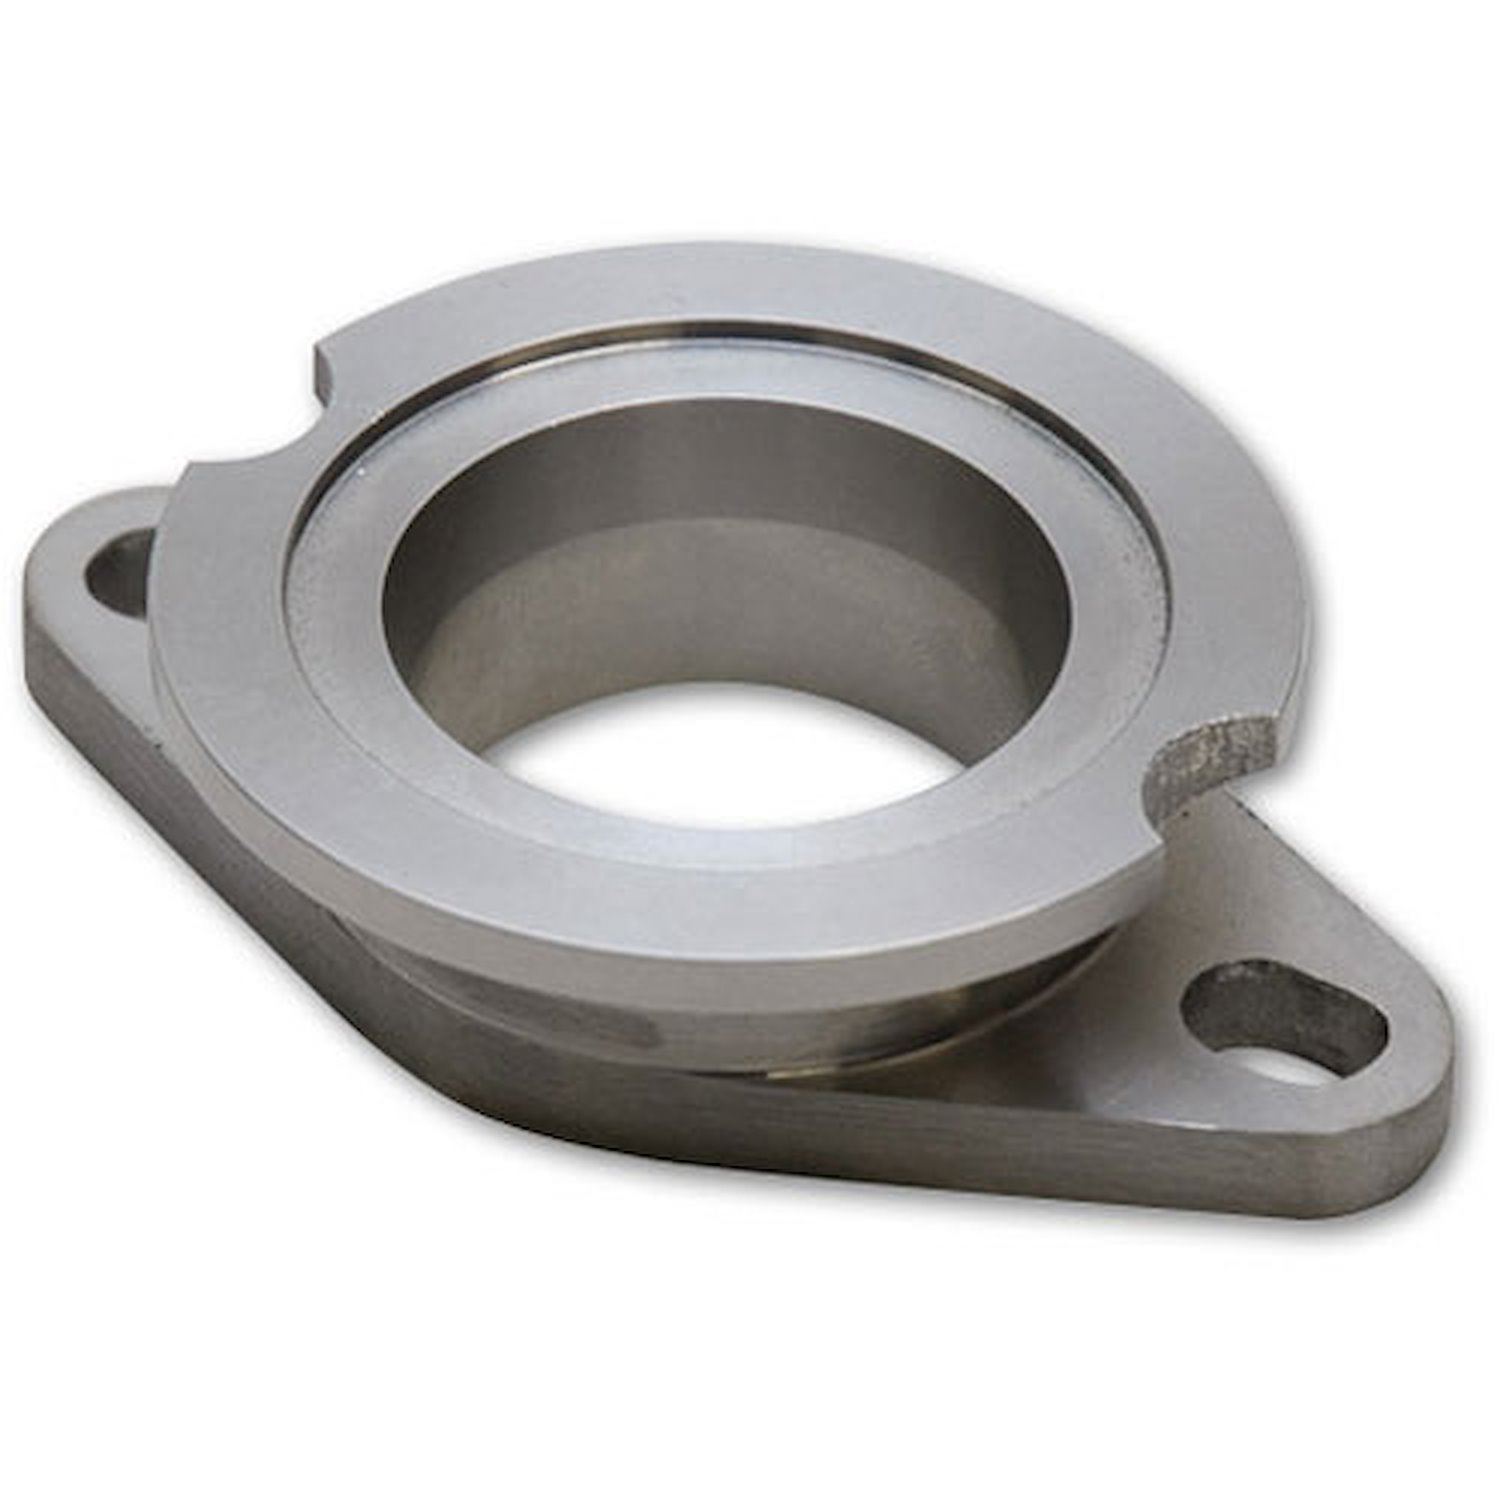 Adapter Flange Turbo Discharge (Downpipe) 38mm to 44mm